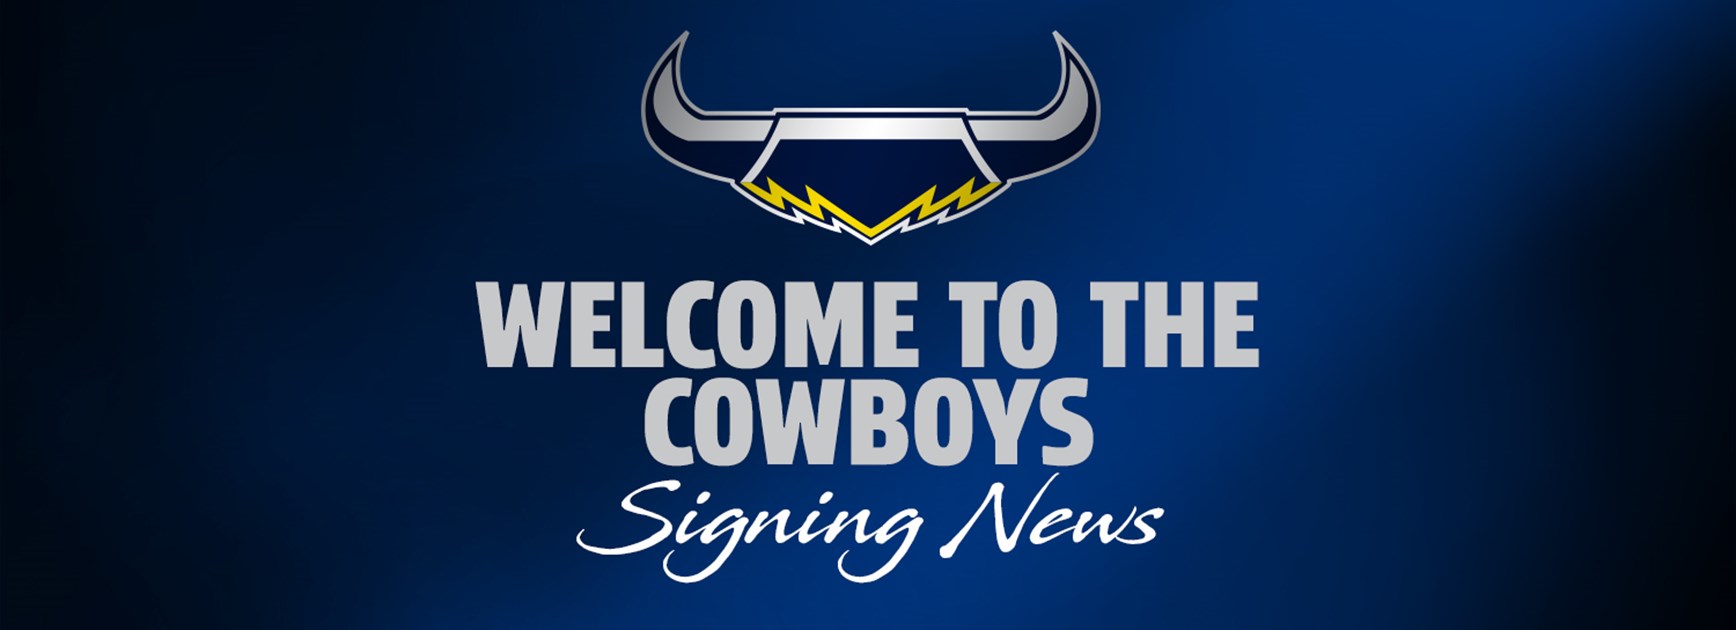 Four more signings for Cowboys